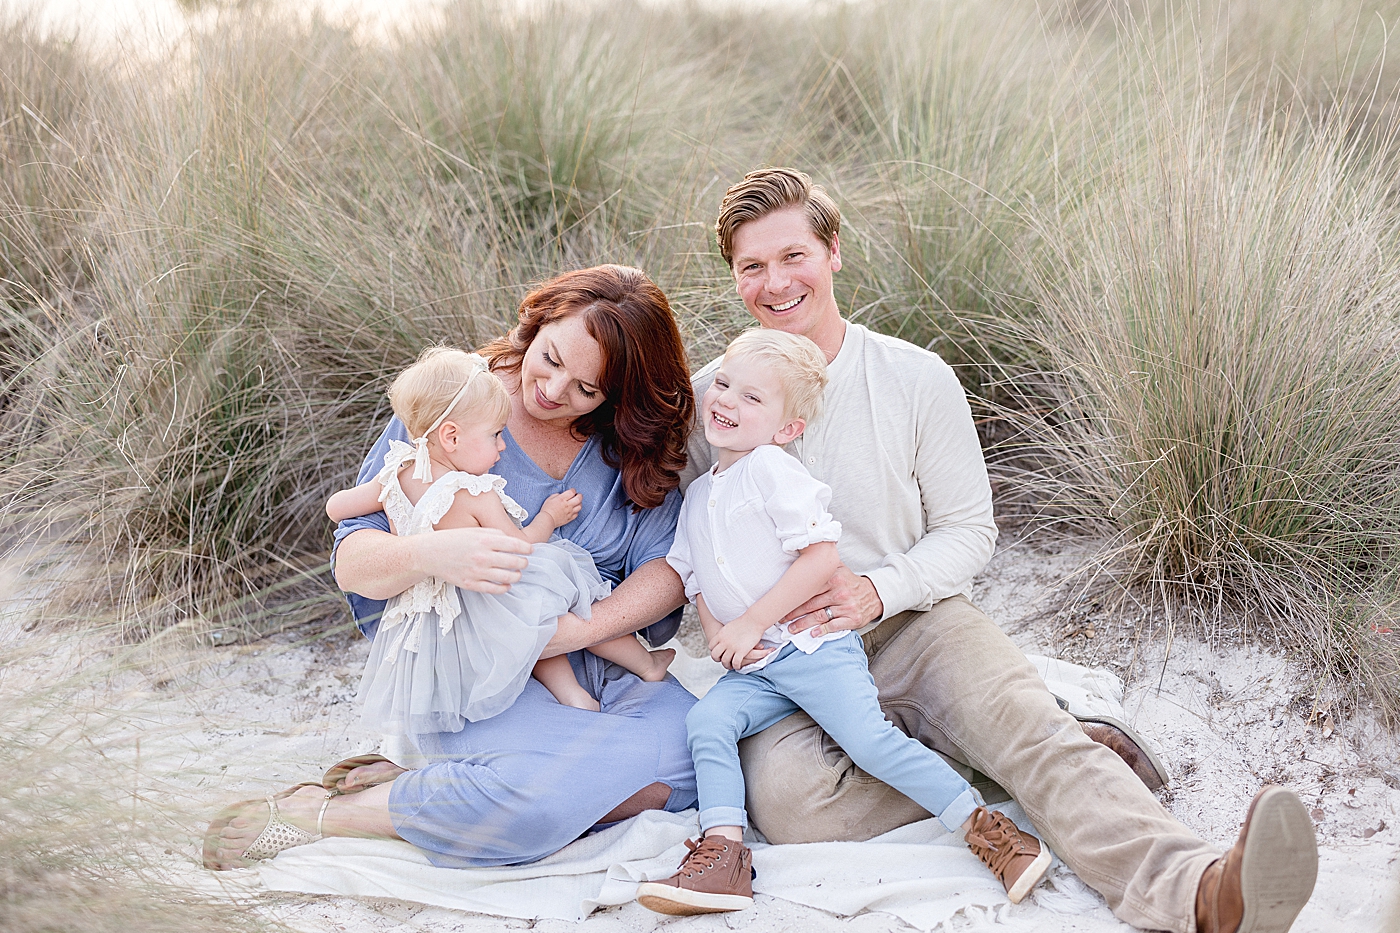 Family portraits at sunset at Cypress Point Park in Tampa, FL. Photo by Brittany Elise Photography.